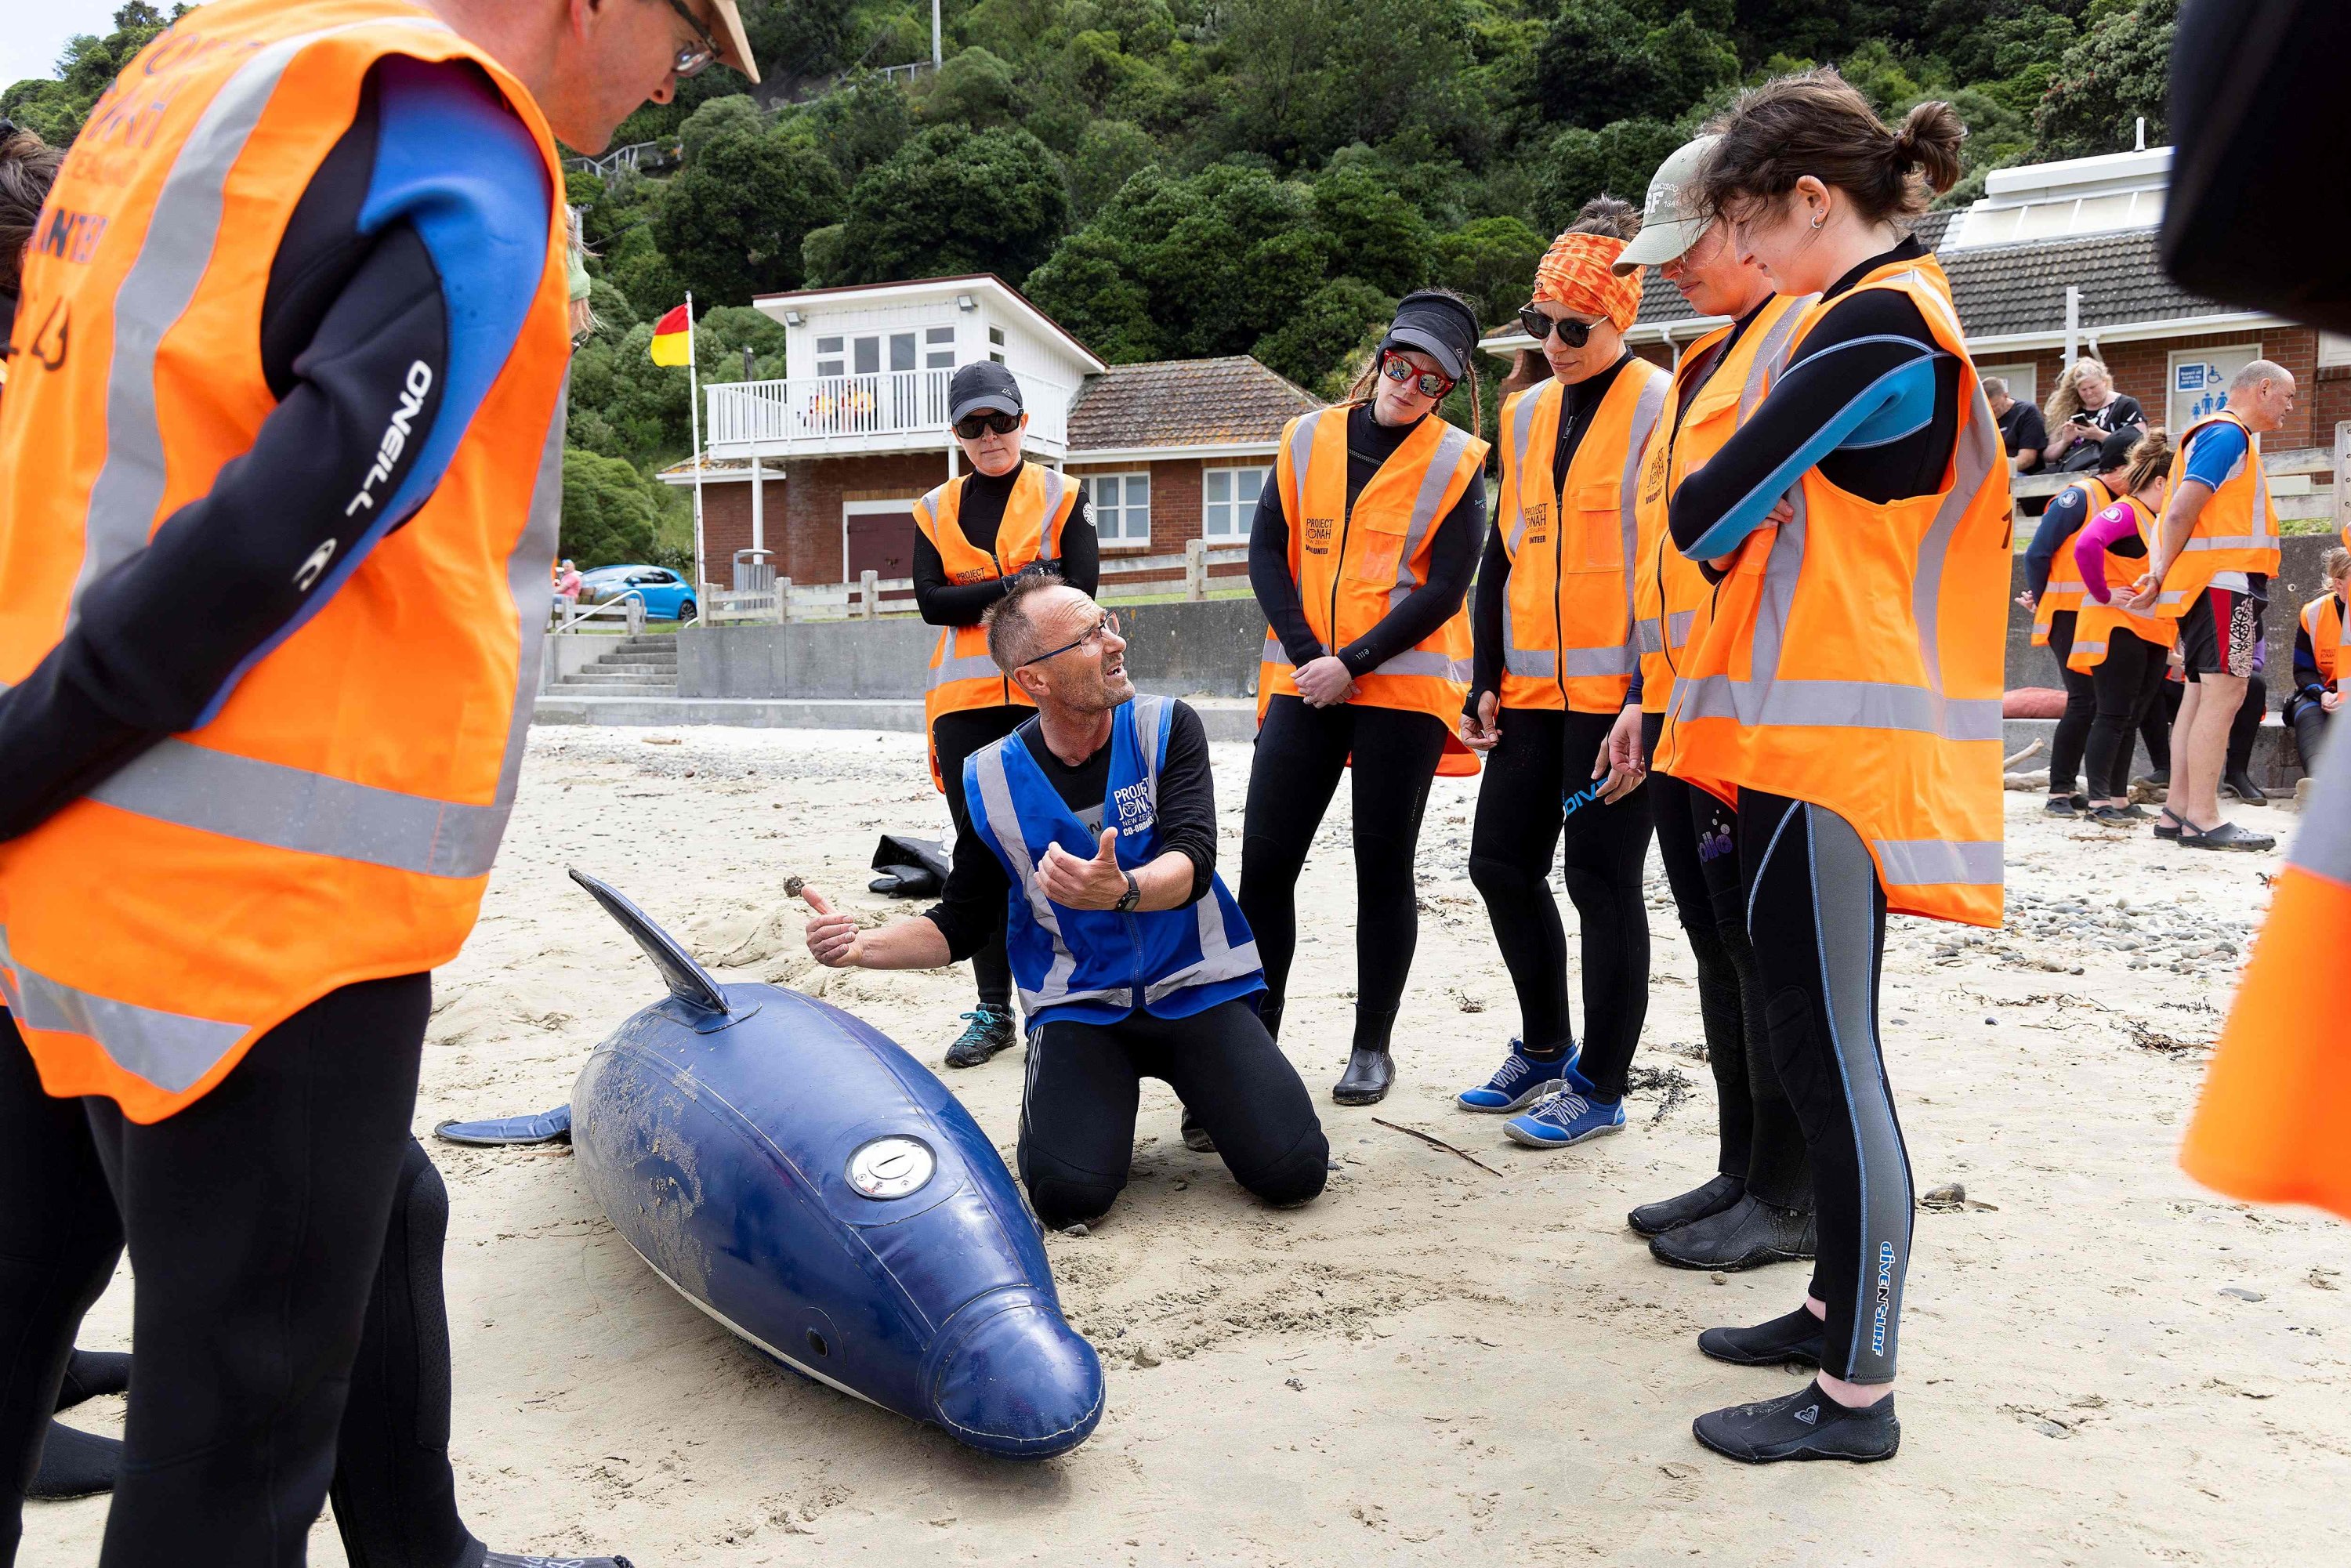 A group of volunteers from New Zealand whale rescue charity Project Jonah are taught how to save a stranded whale by a group instructor, at Scorching Bay in Wellington, Dec. 11, 2021. (AFP Photo)